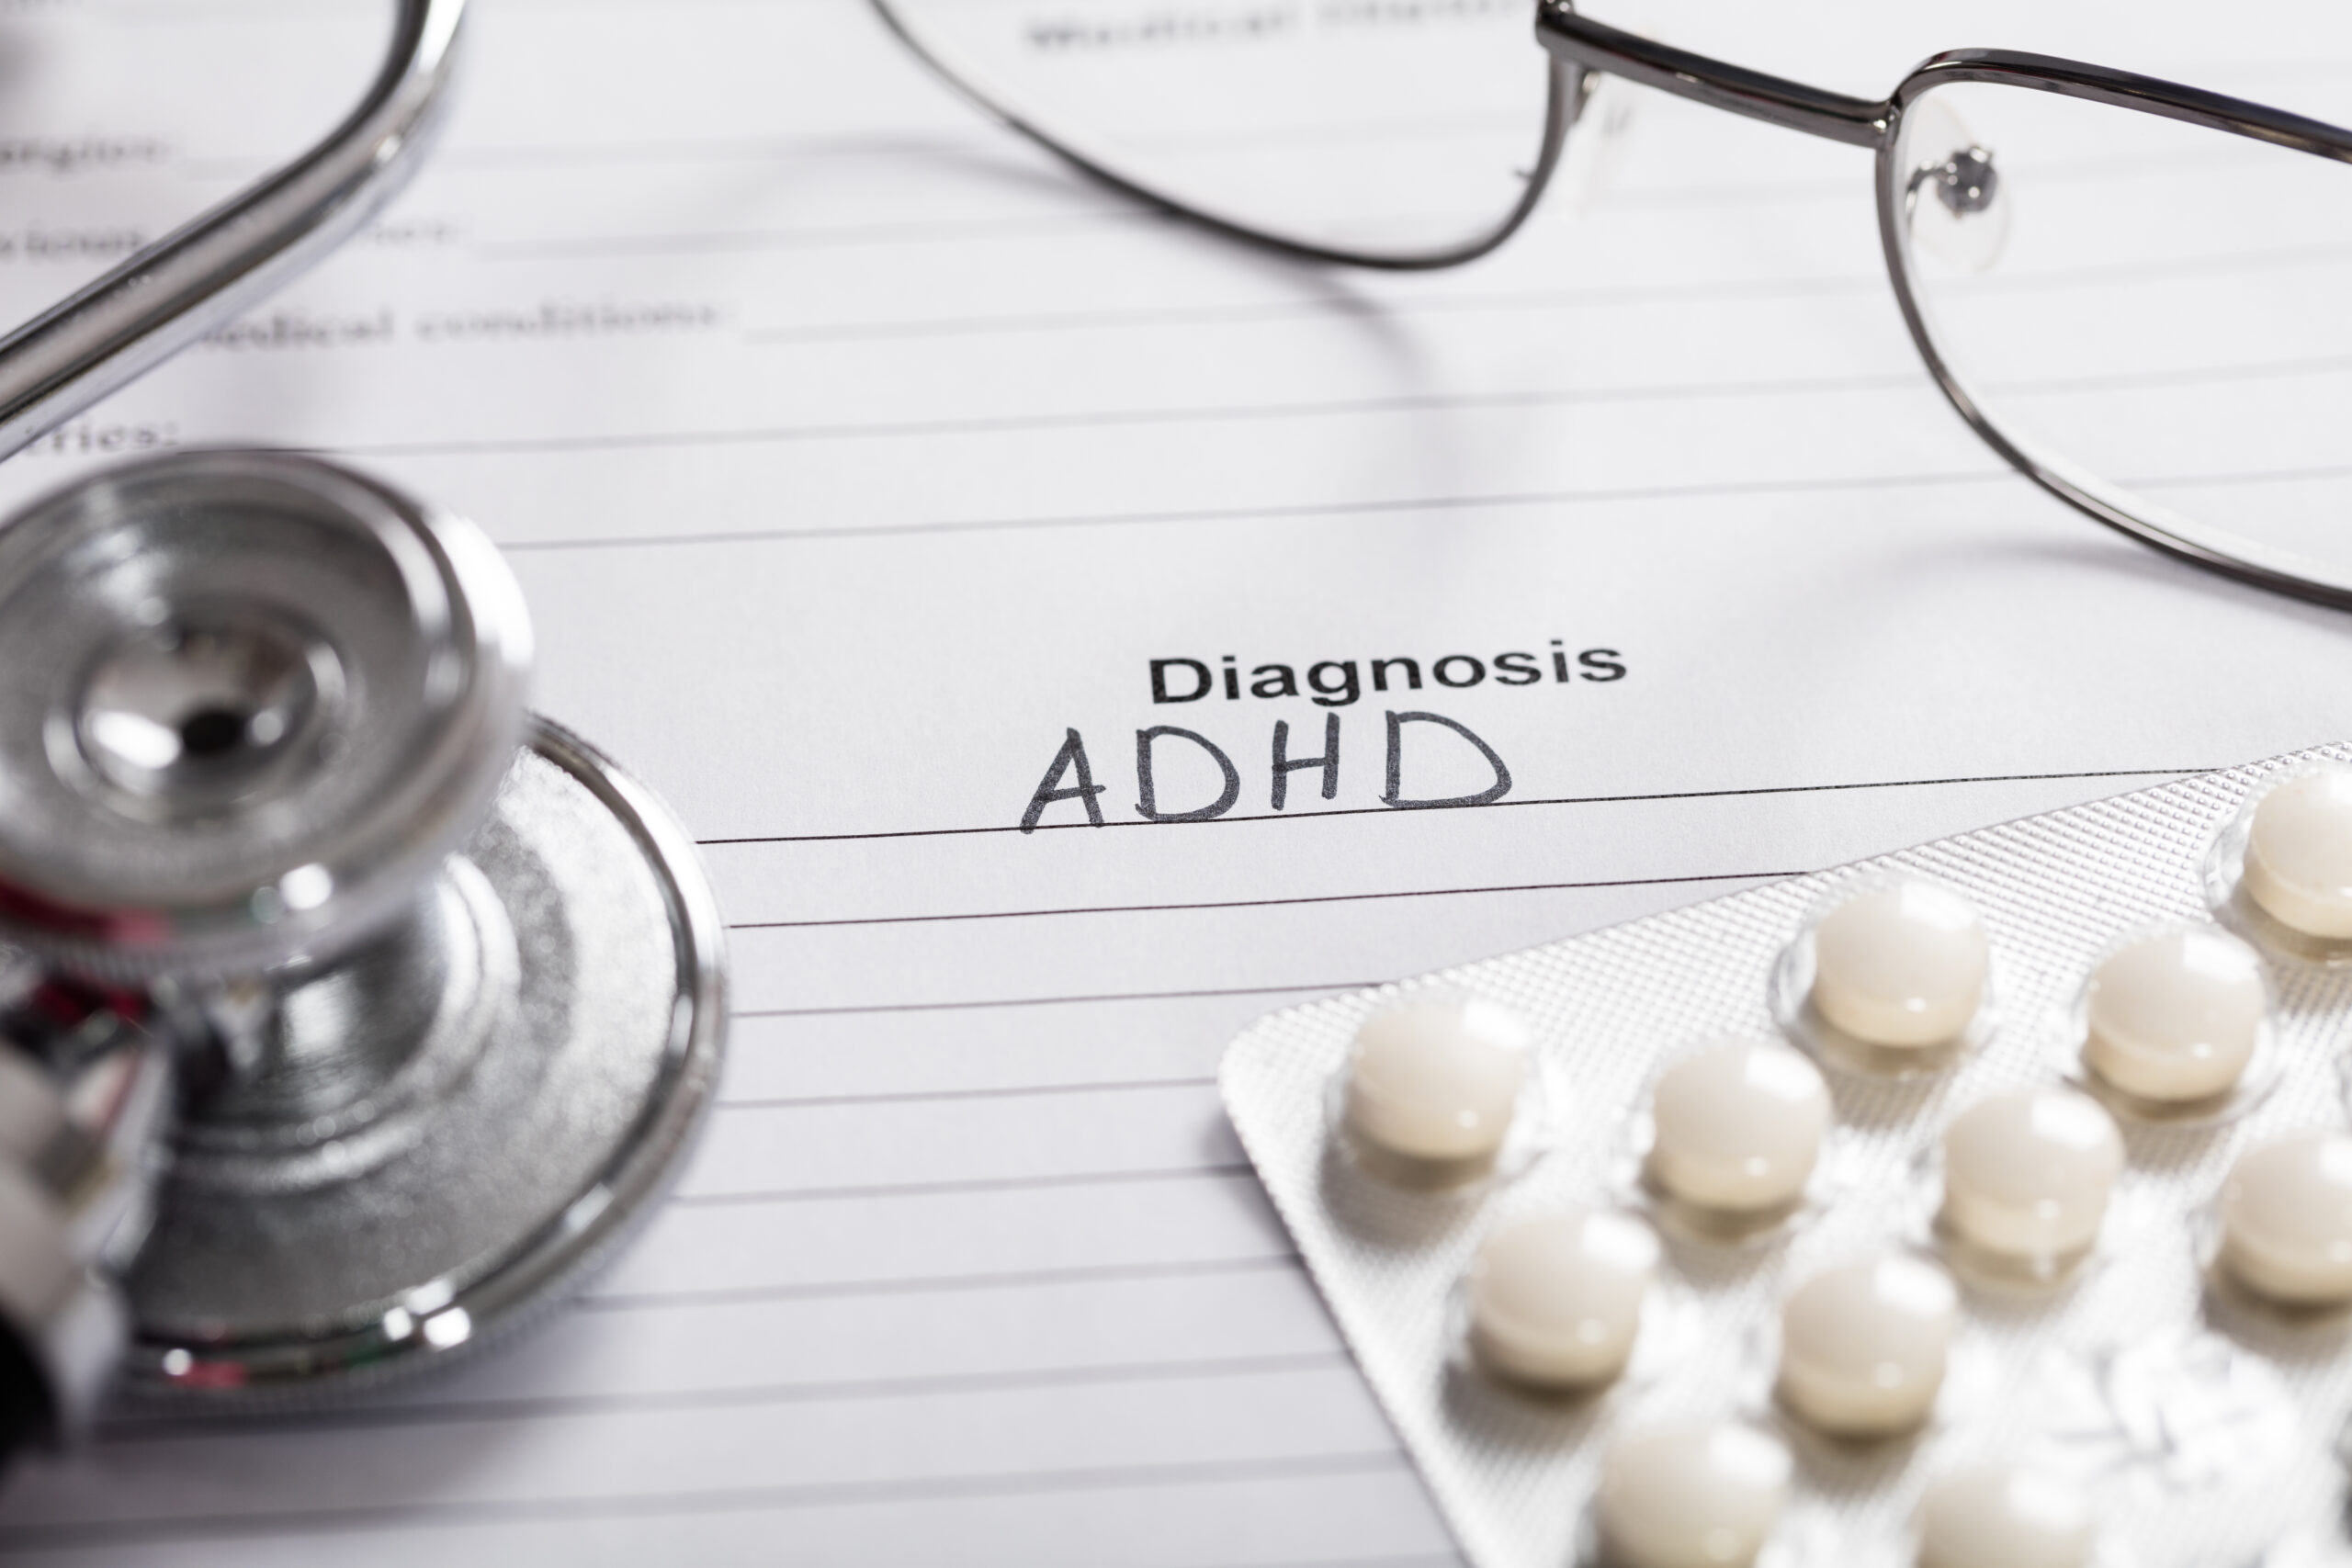 Some Young Users of ADHD Drugs Risk Psychotic Side Effects